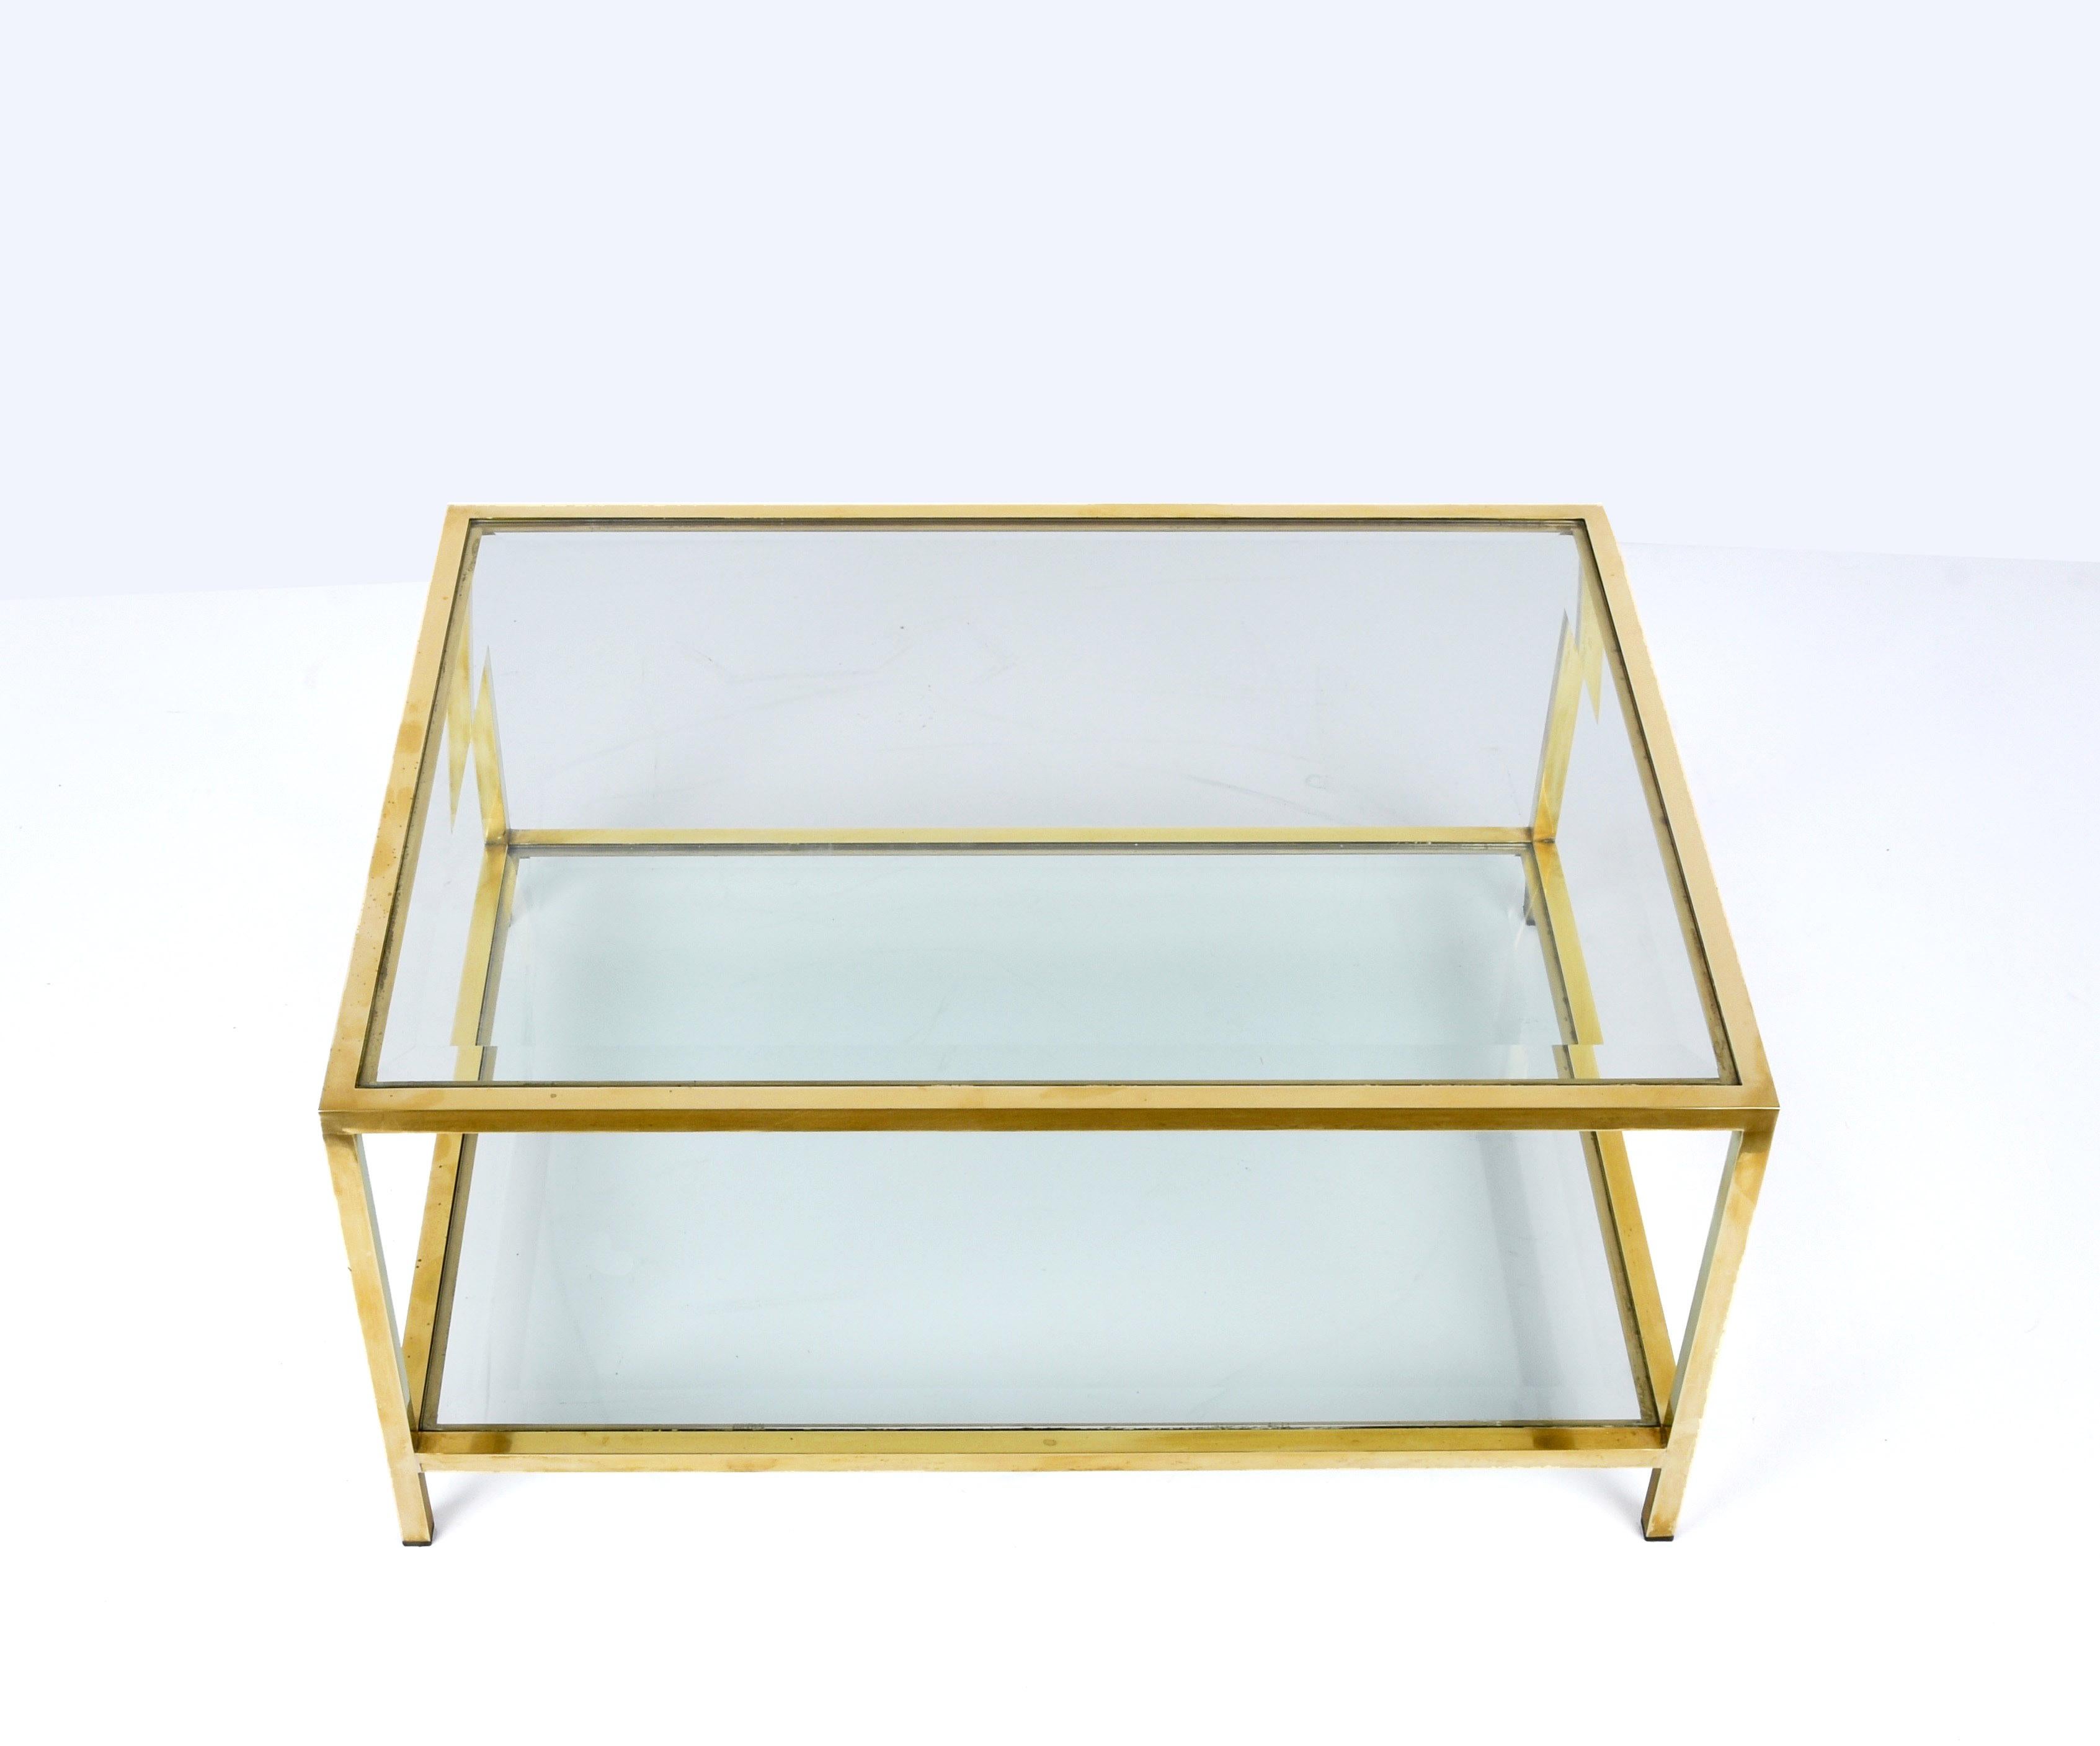 MidCentury Brass and Glass Italian Double-Tiered Rectangular Coffee Table, 1970s For Sale 7